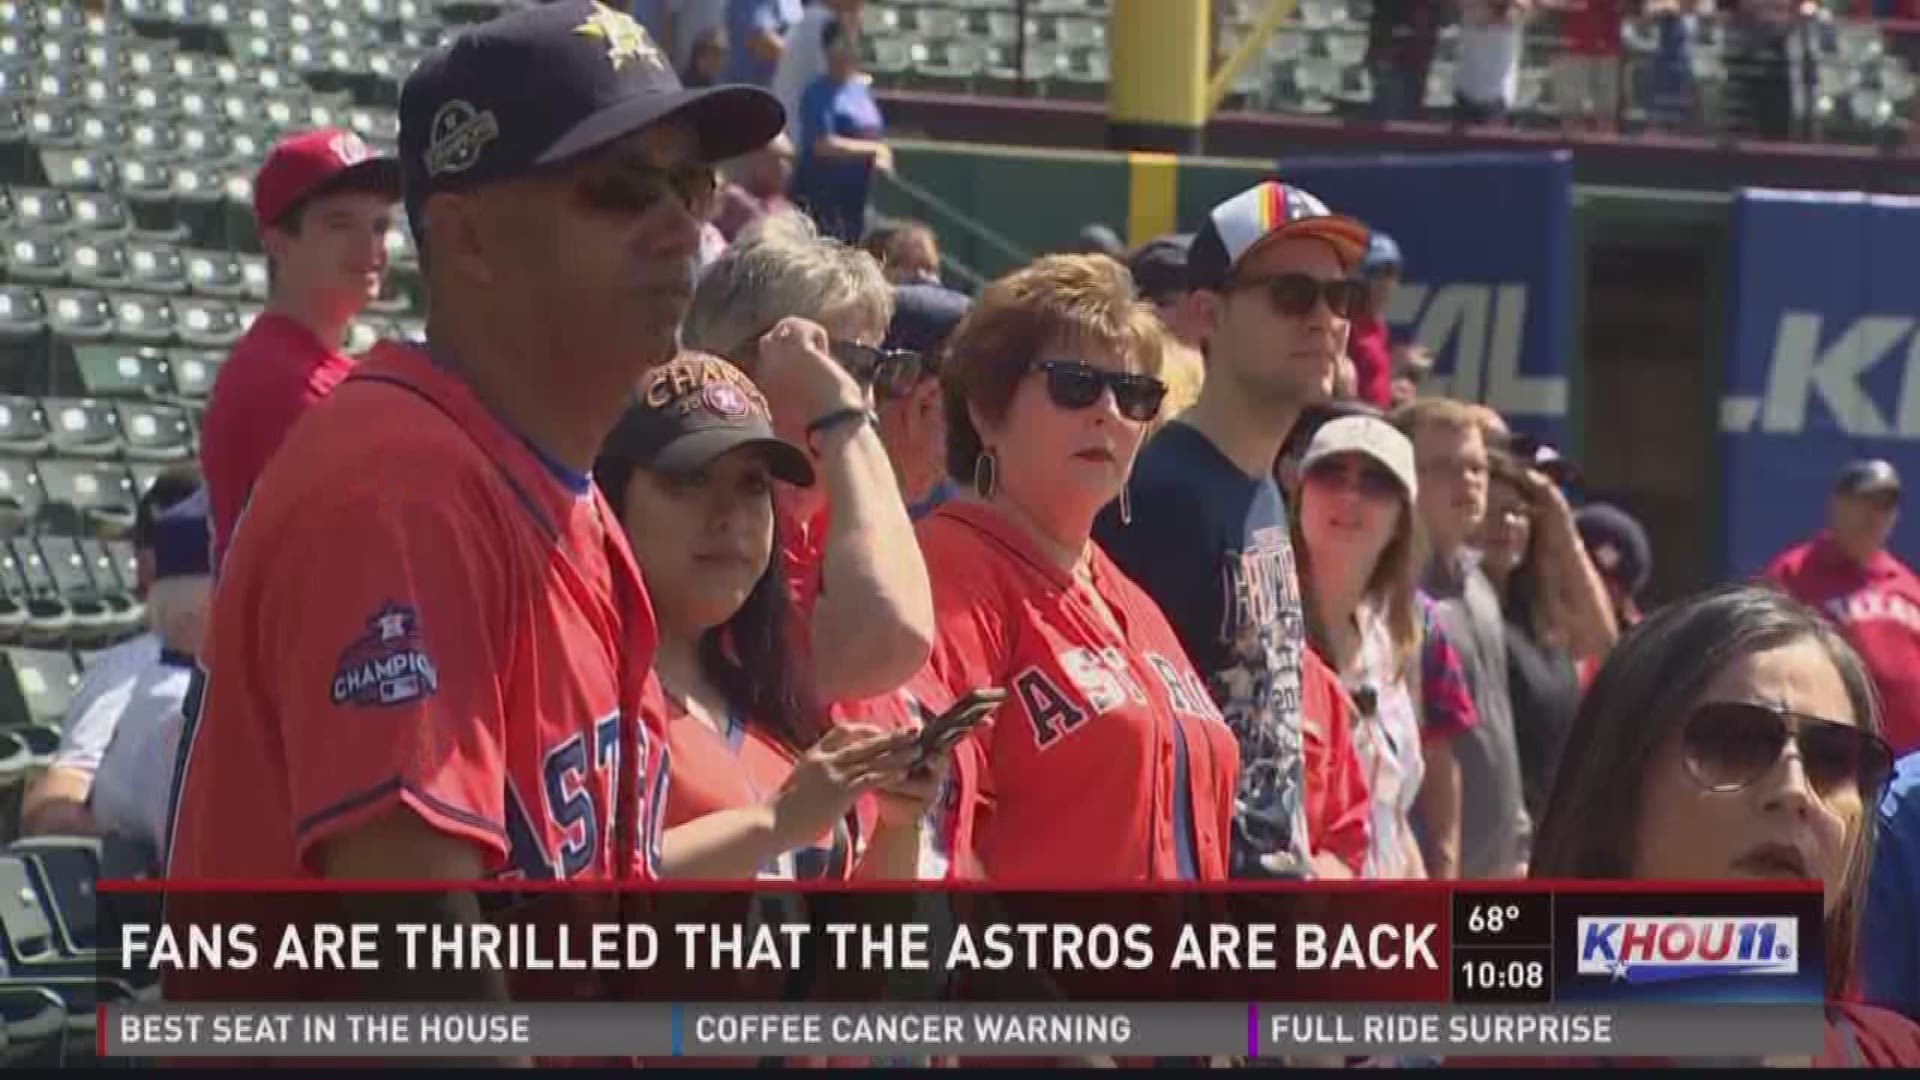 Houston Astros fans traveled to Arlington, Texas to see the Houston Astros play in their first game of the season. 